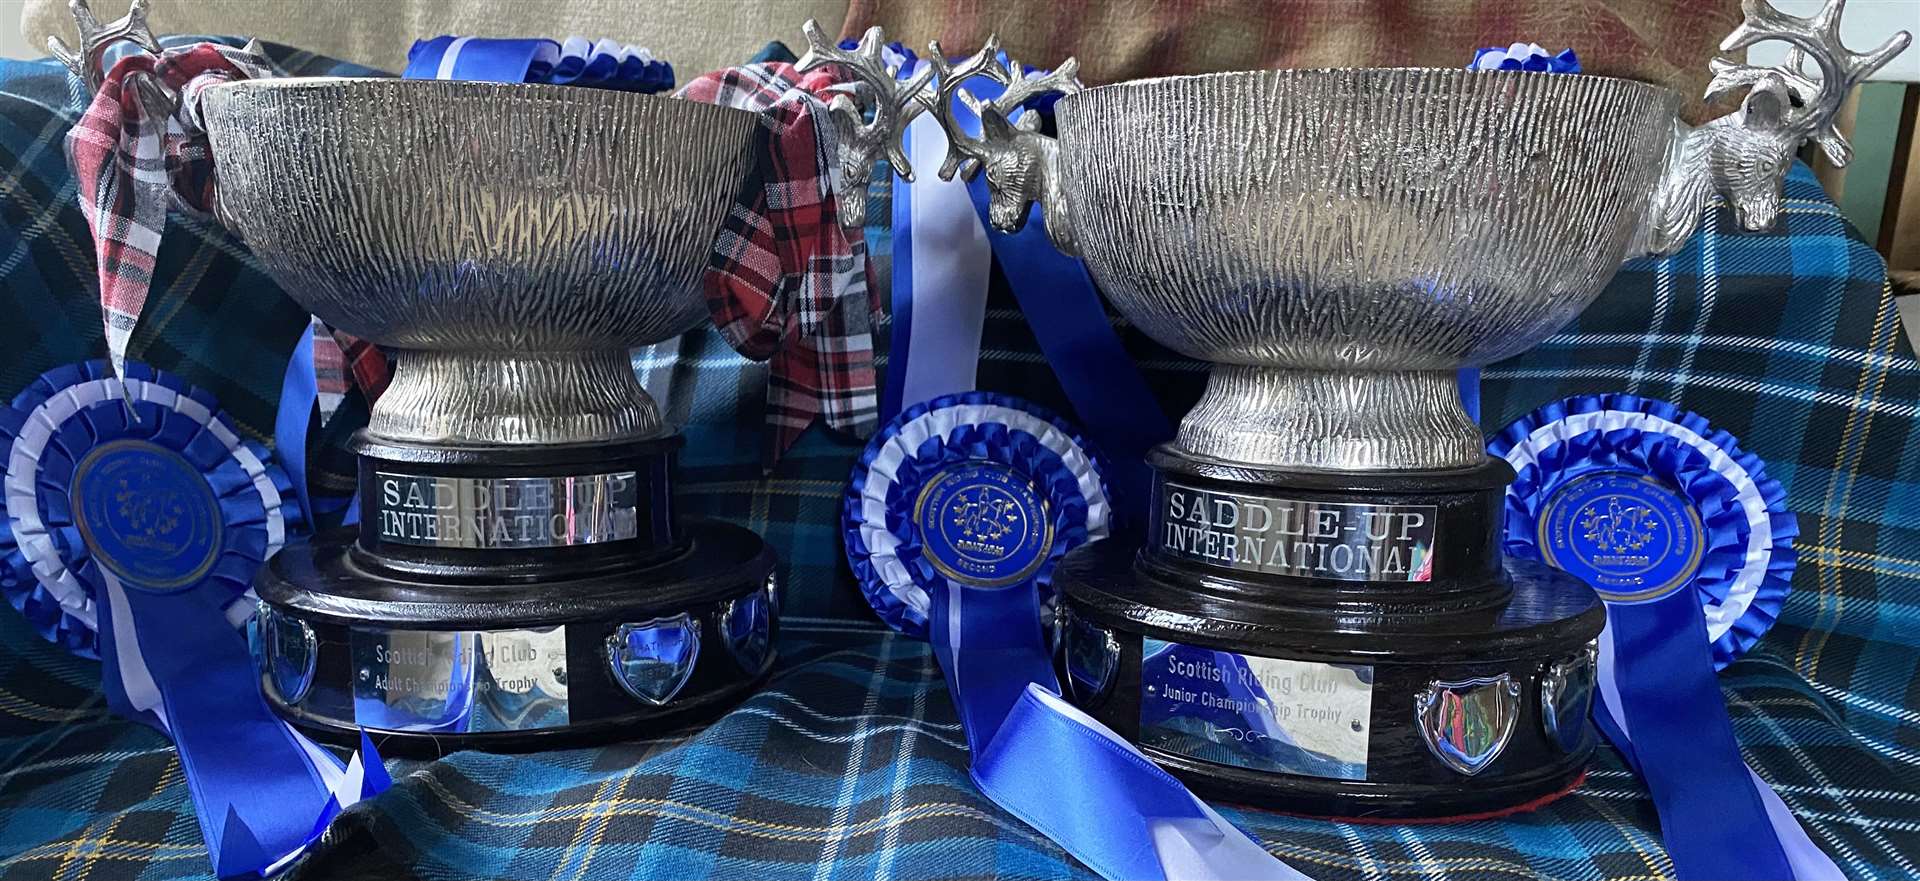 Caithness Riding Club gained the most points at the Scottish Riding Club Championships 2023 for both the senior and junior riders. The teams were presented with two trophies.